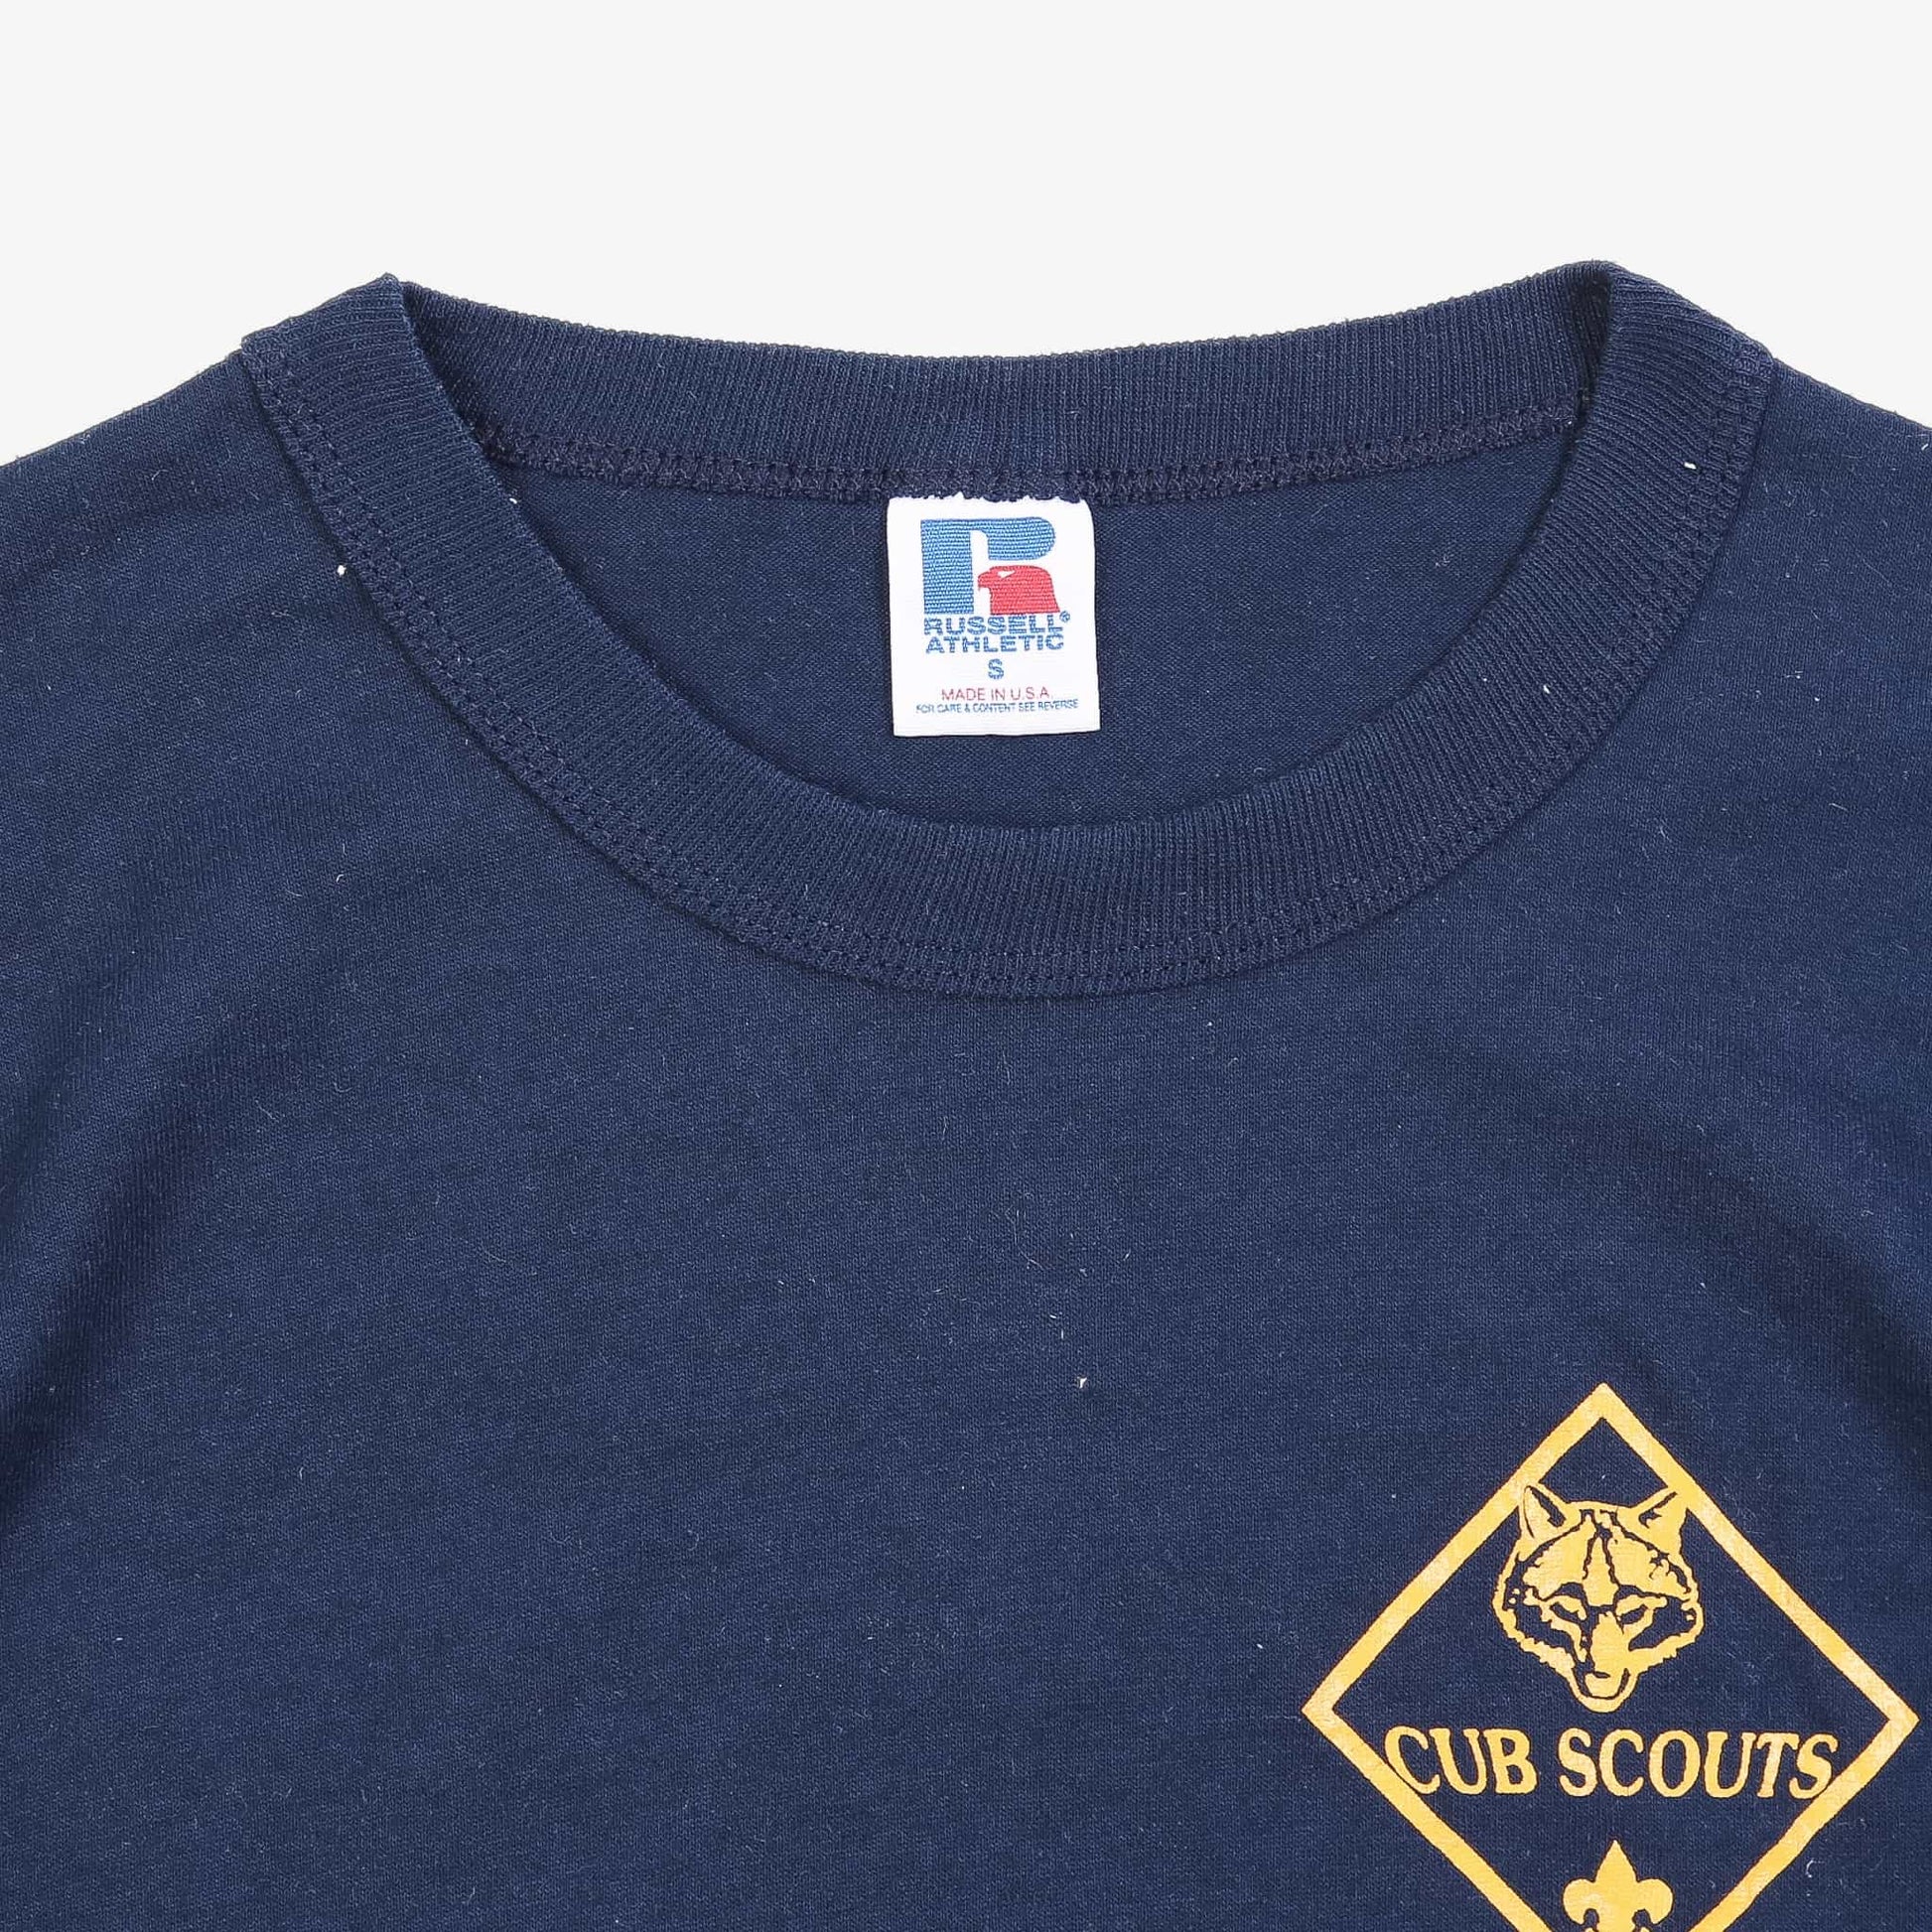 Vintage "Cub Scouts" T-Shirt - American Madness